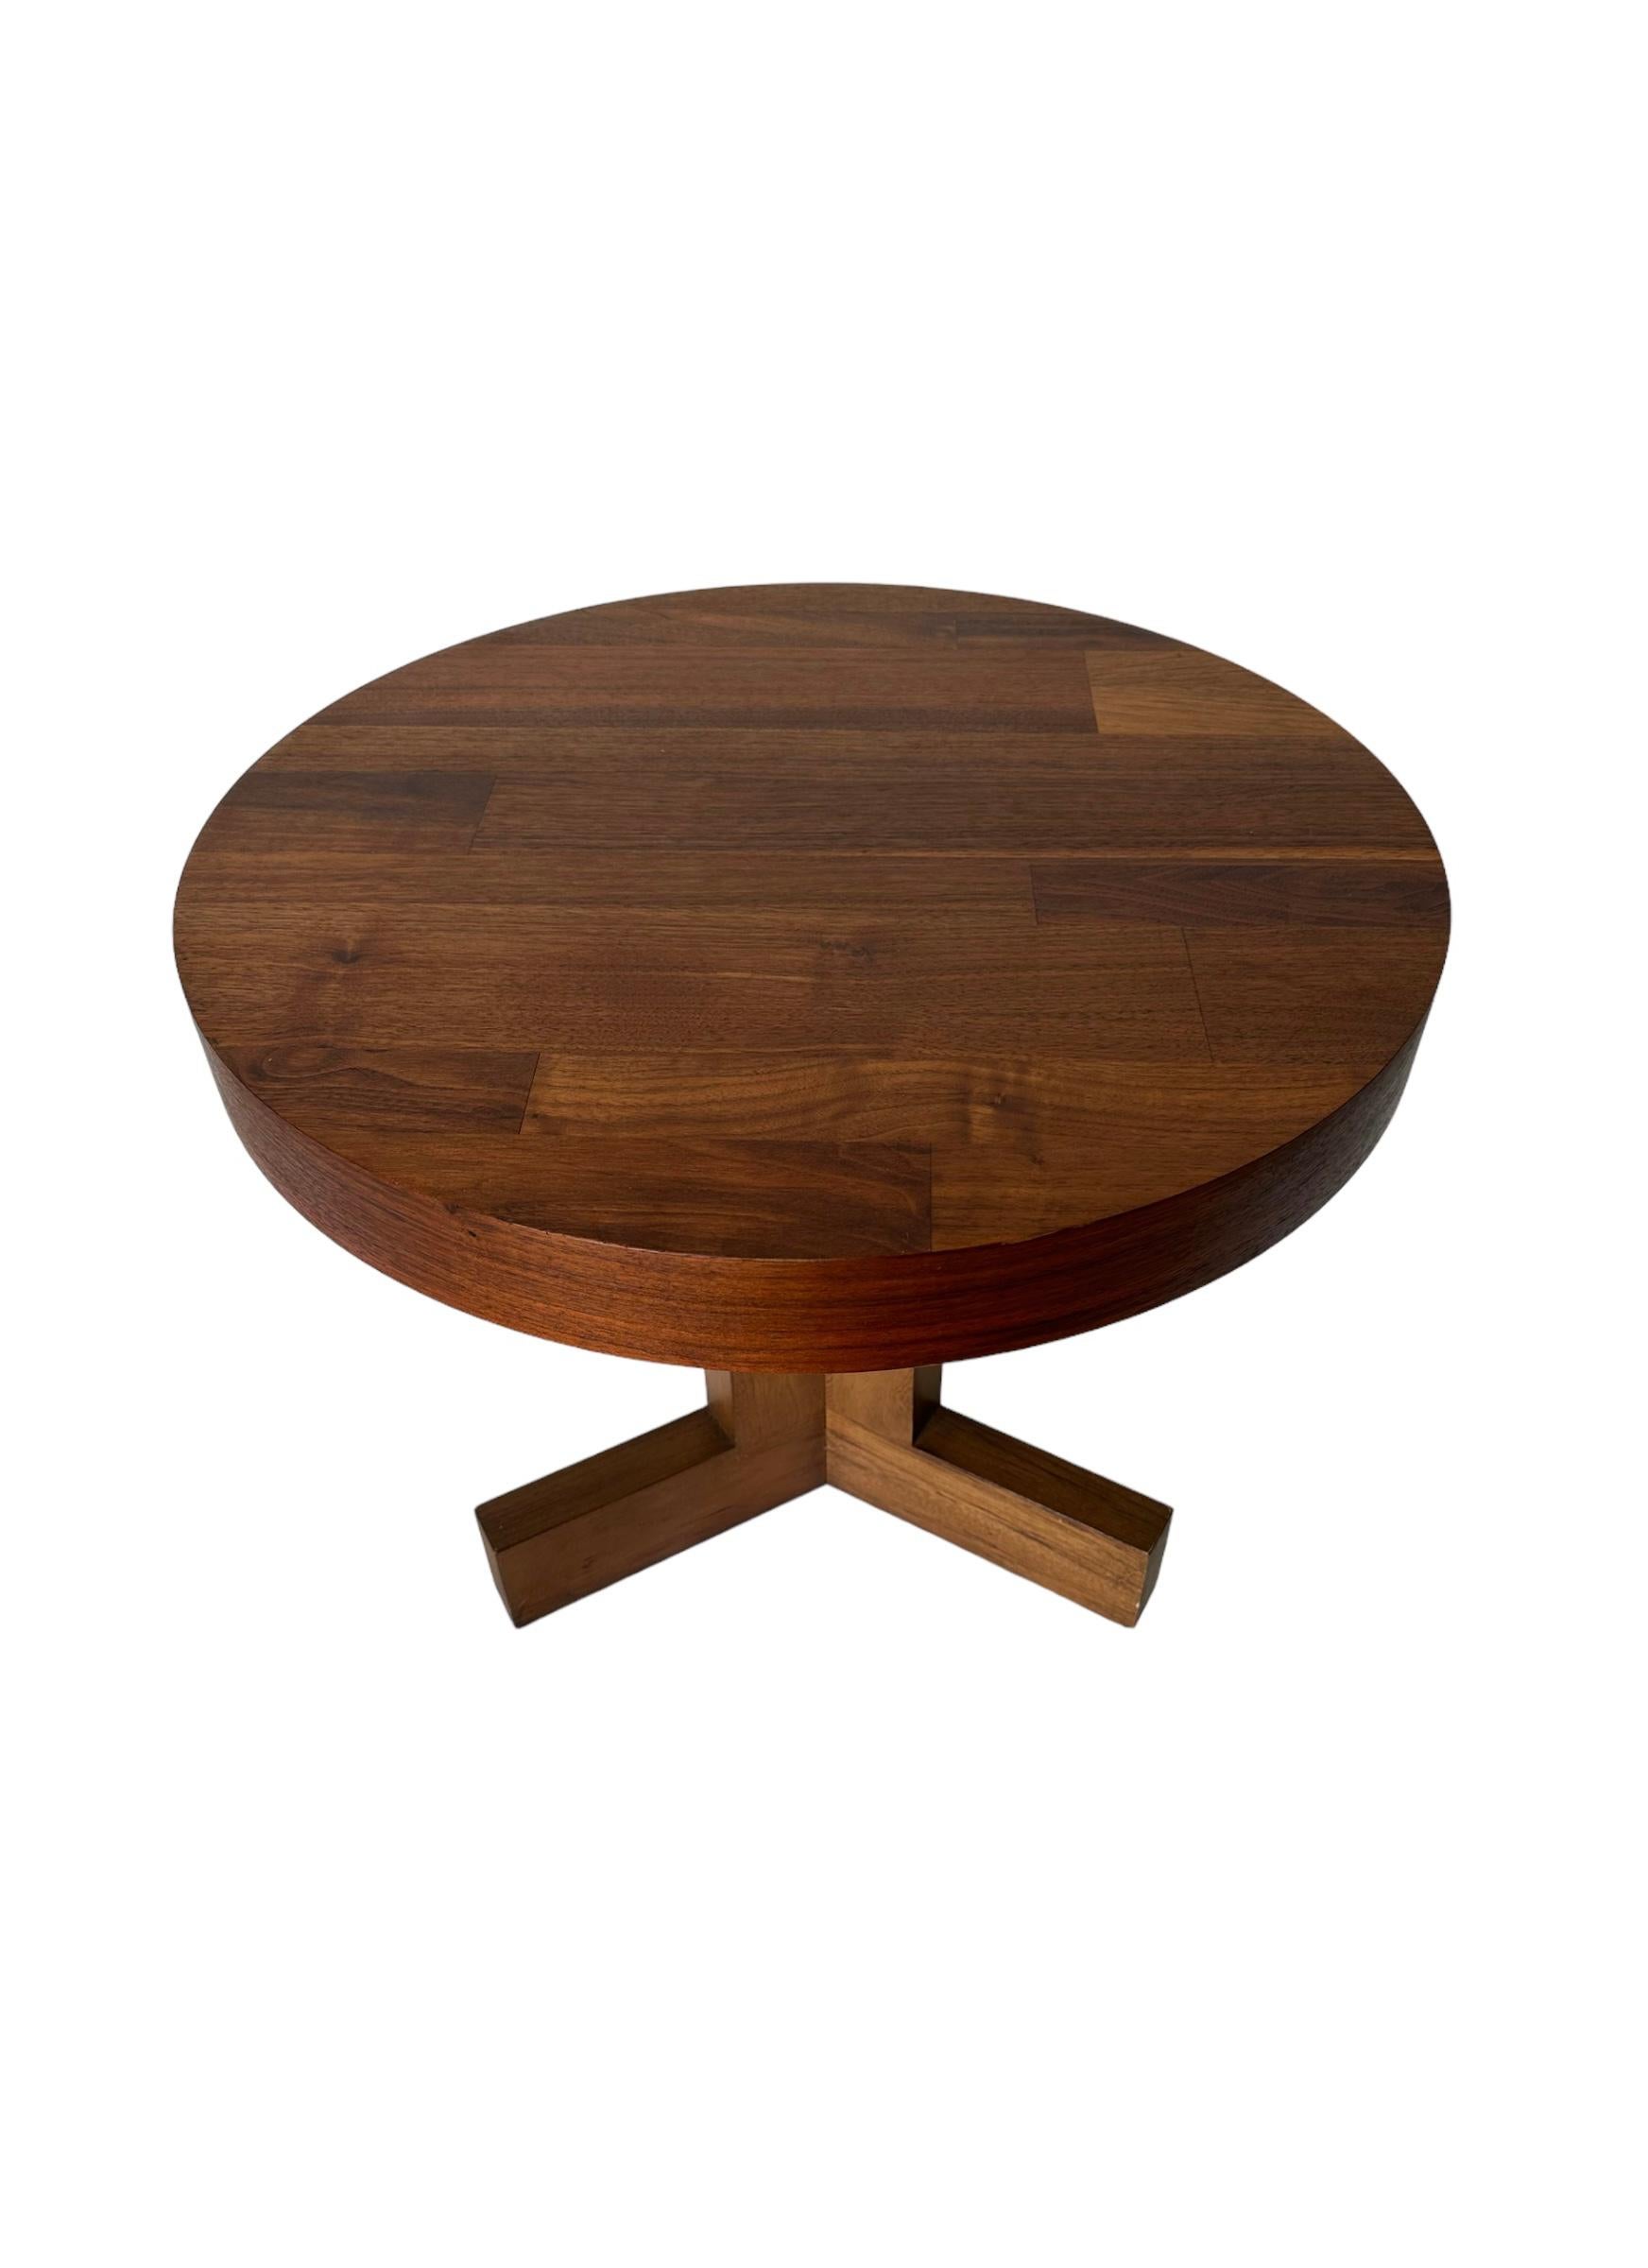 American Walnut Round Side/End Table by Lane For Sale